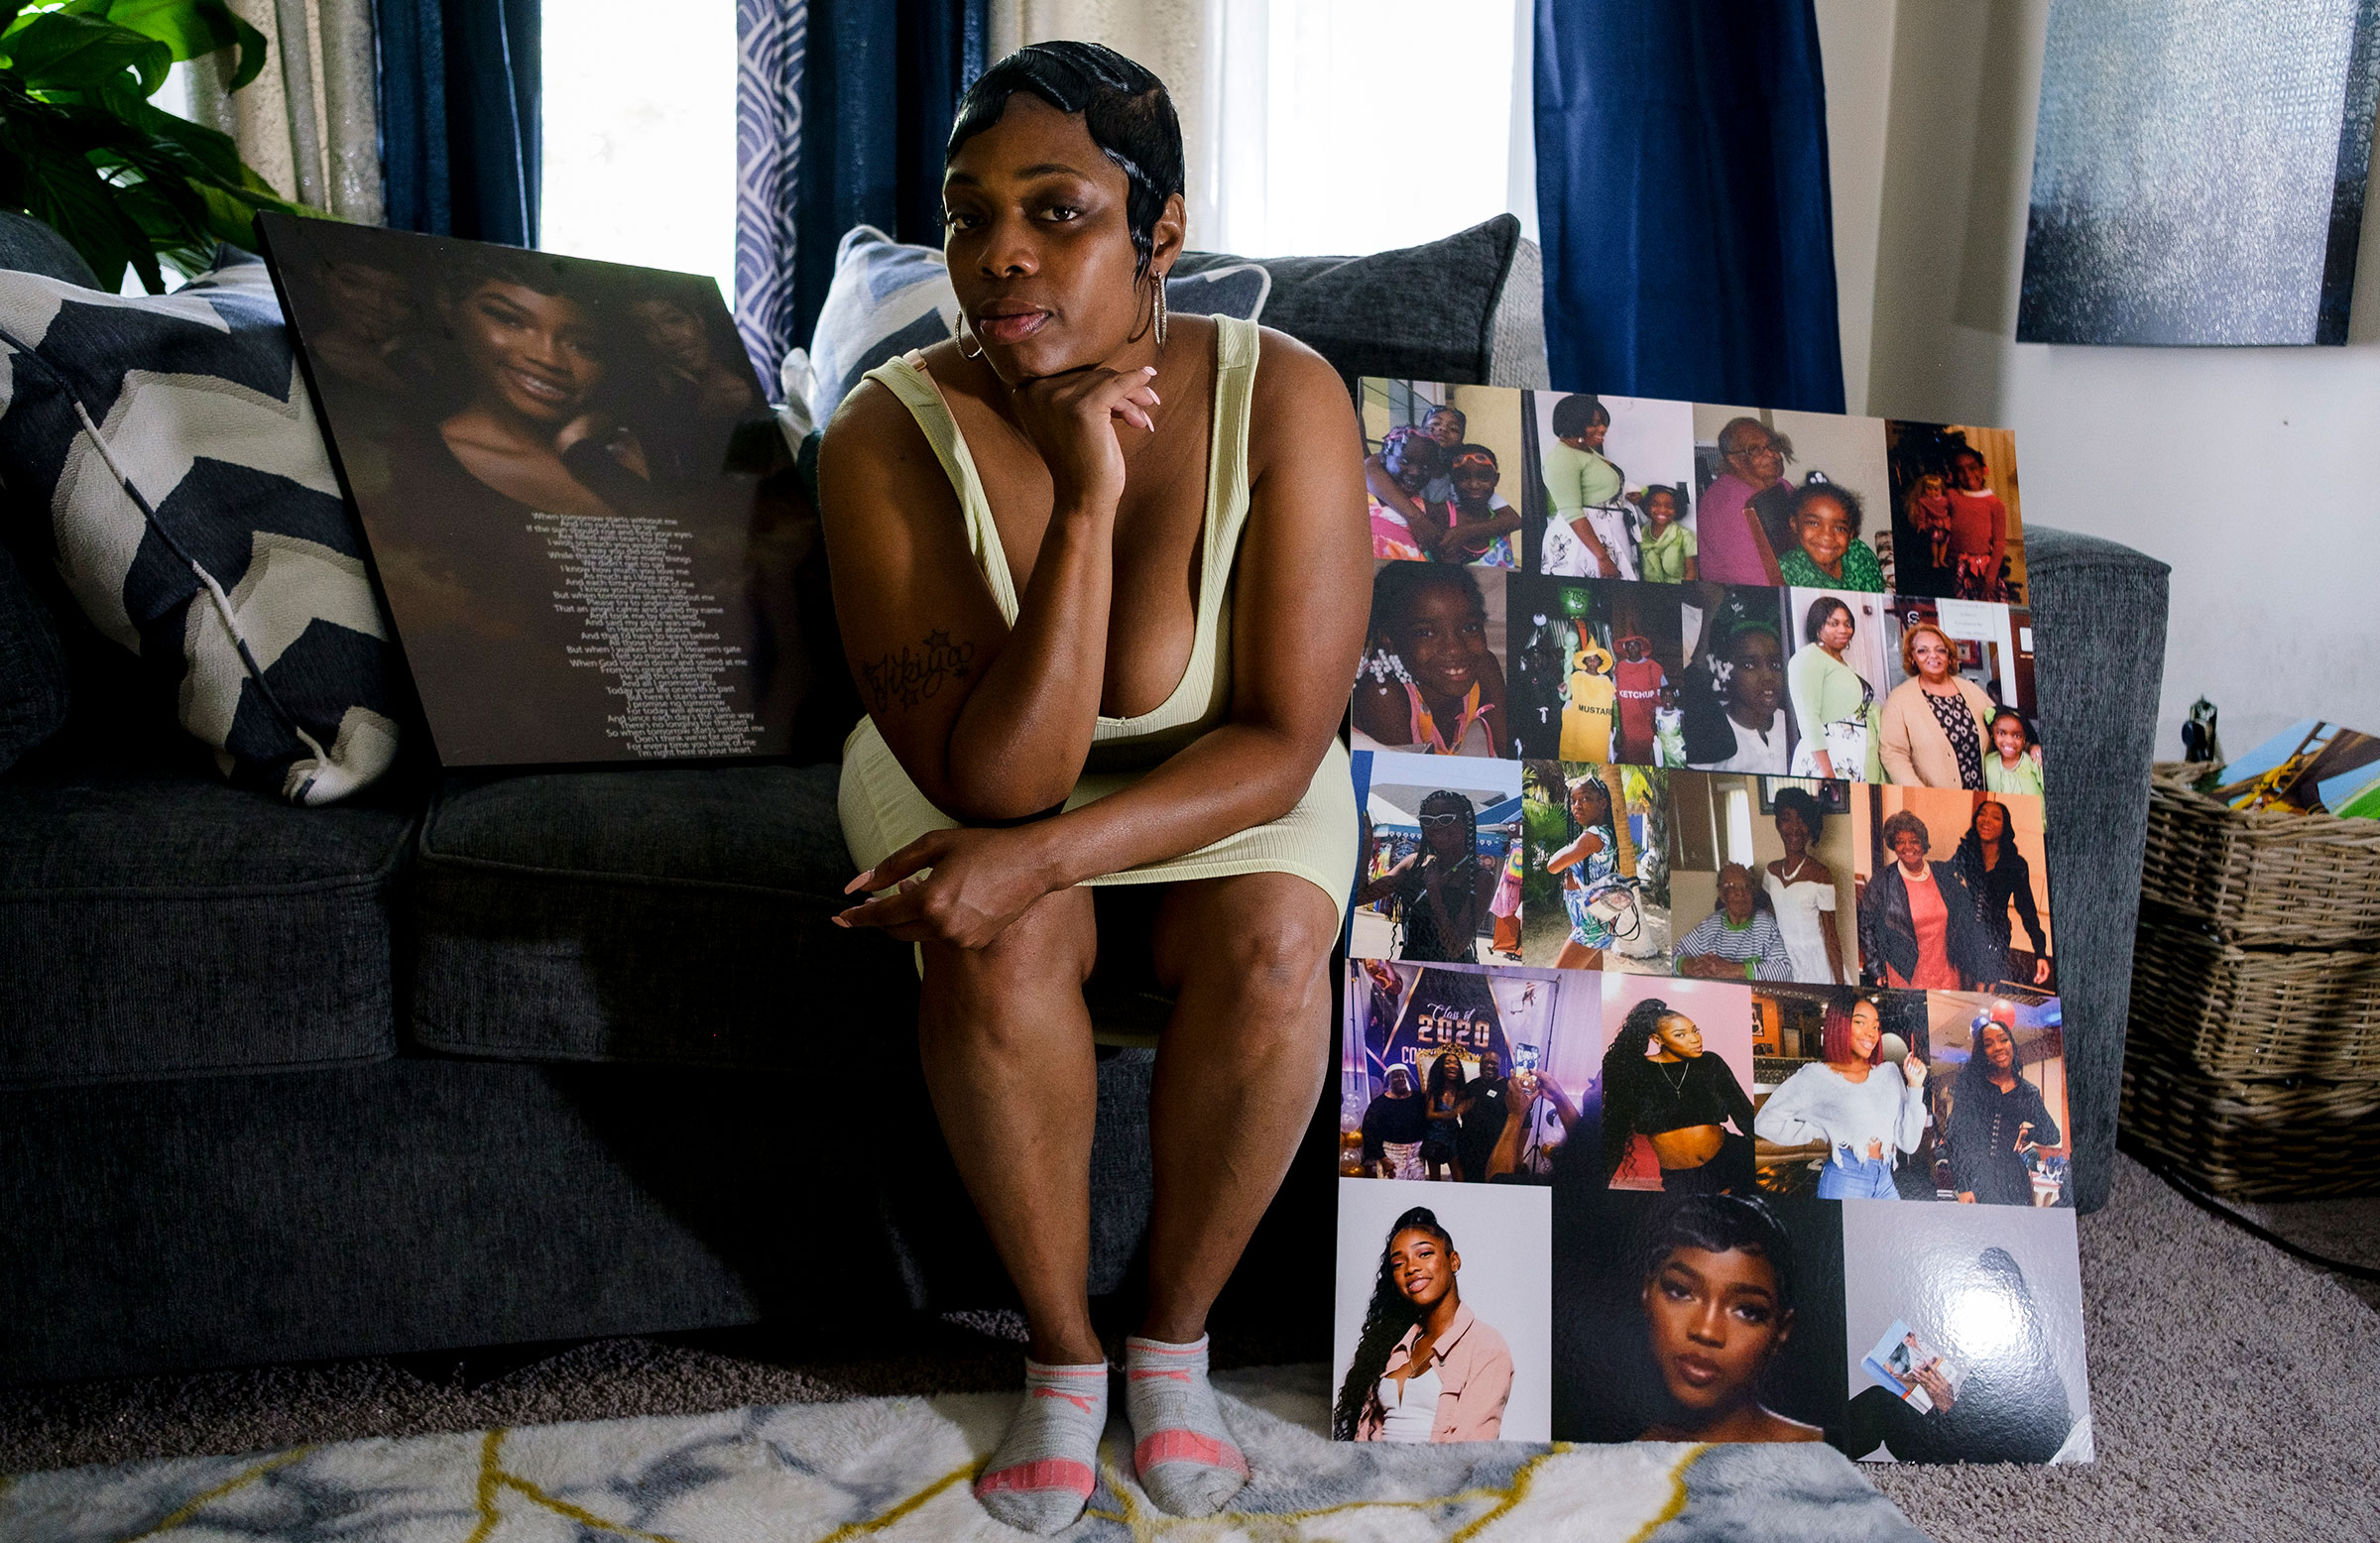 Kai Cooks, 39, at her home in Detroit, Mich., on Sept. 7, 2021. In July, Cooks lost her 18-year-old daughter TiKiya Allen, who was riding her bicycle when she was shot and killed during a drive-by shooting. (Brittany Greeson for TIME)